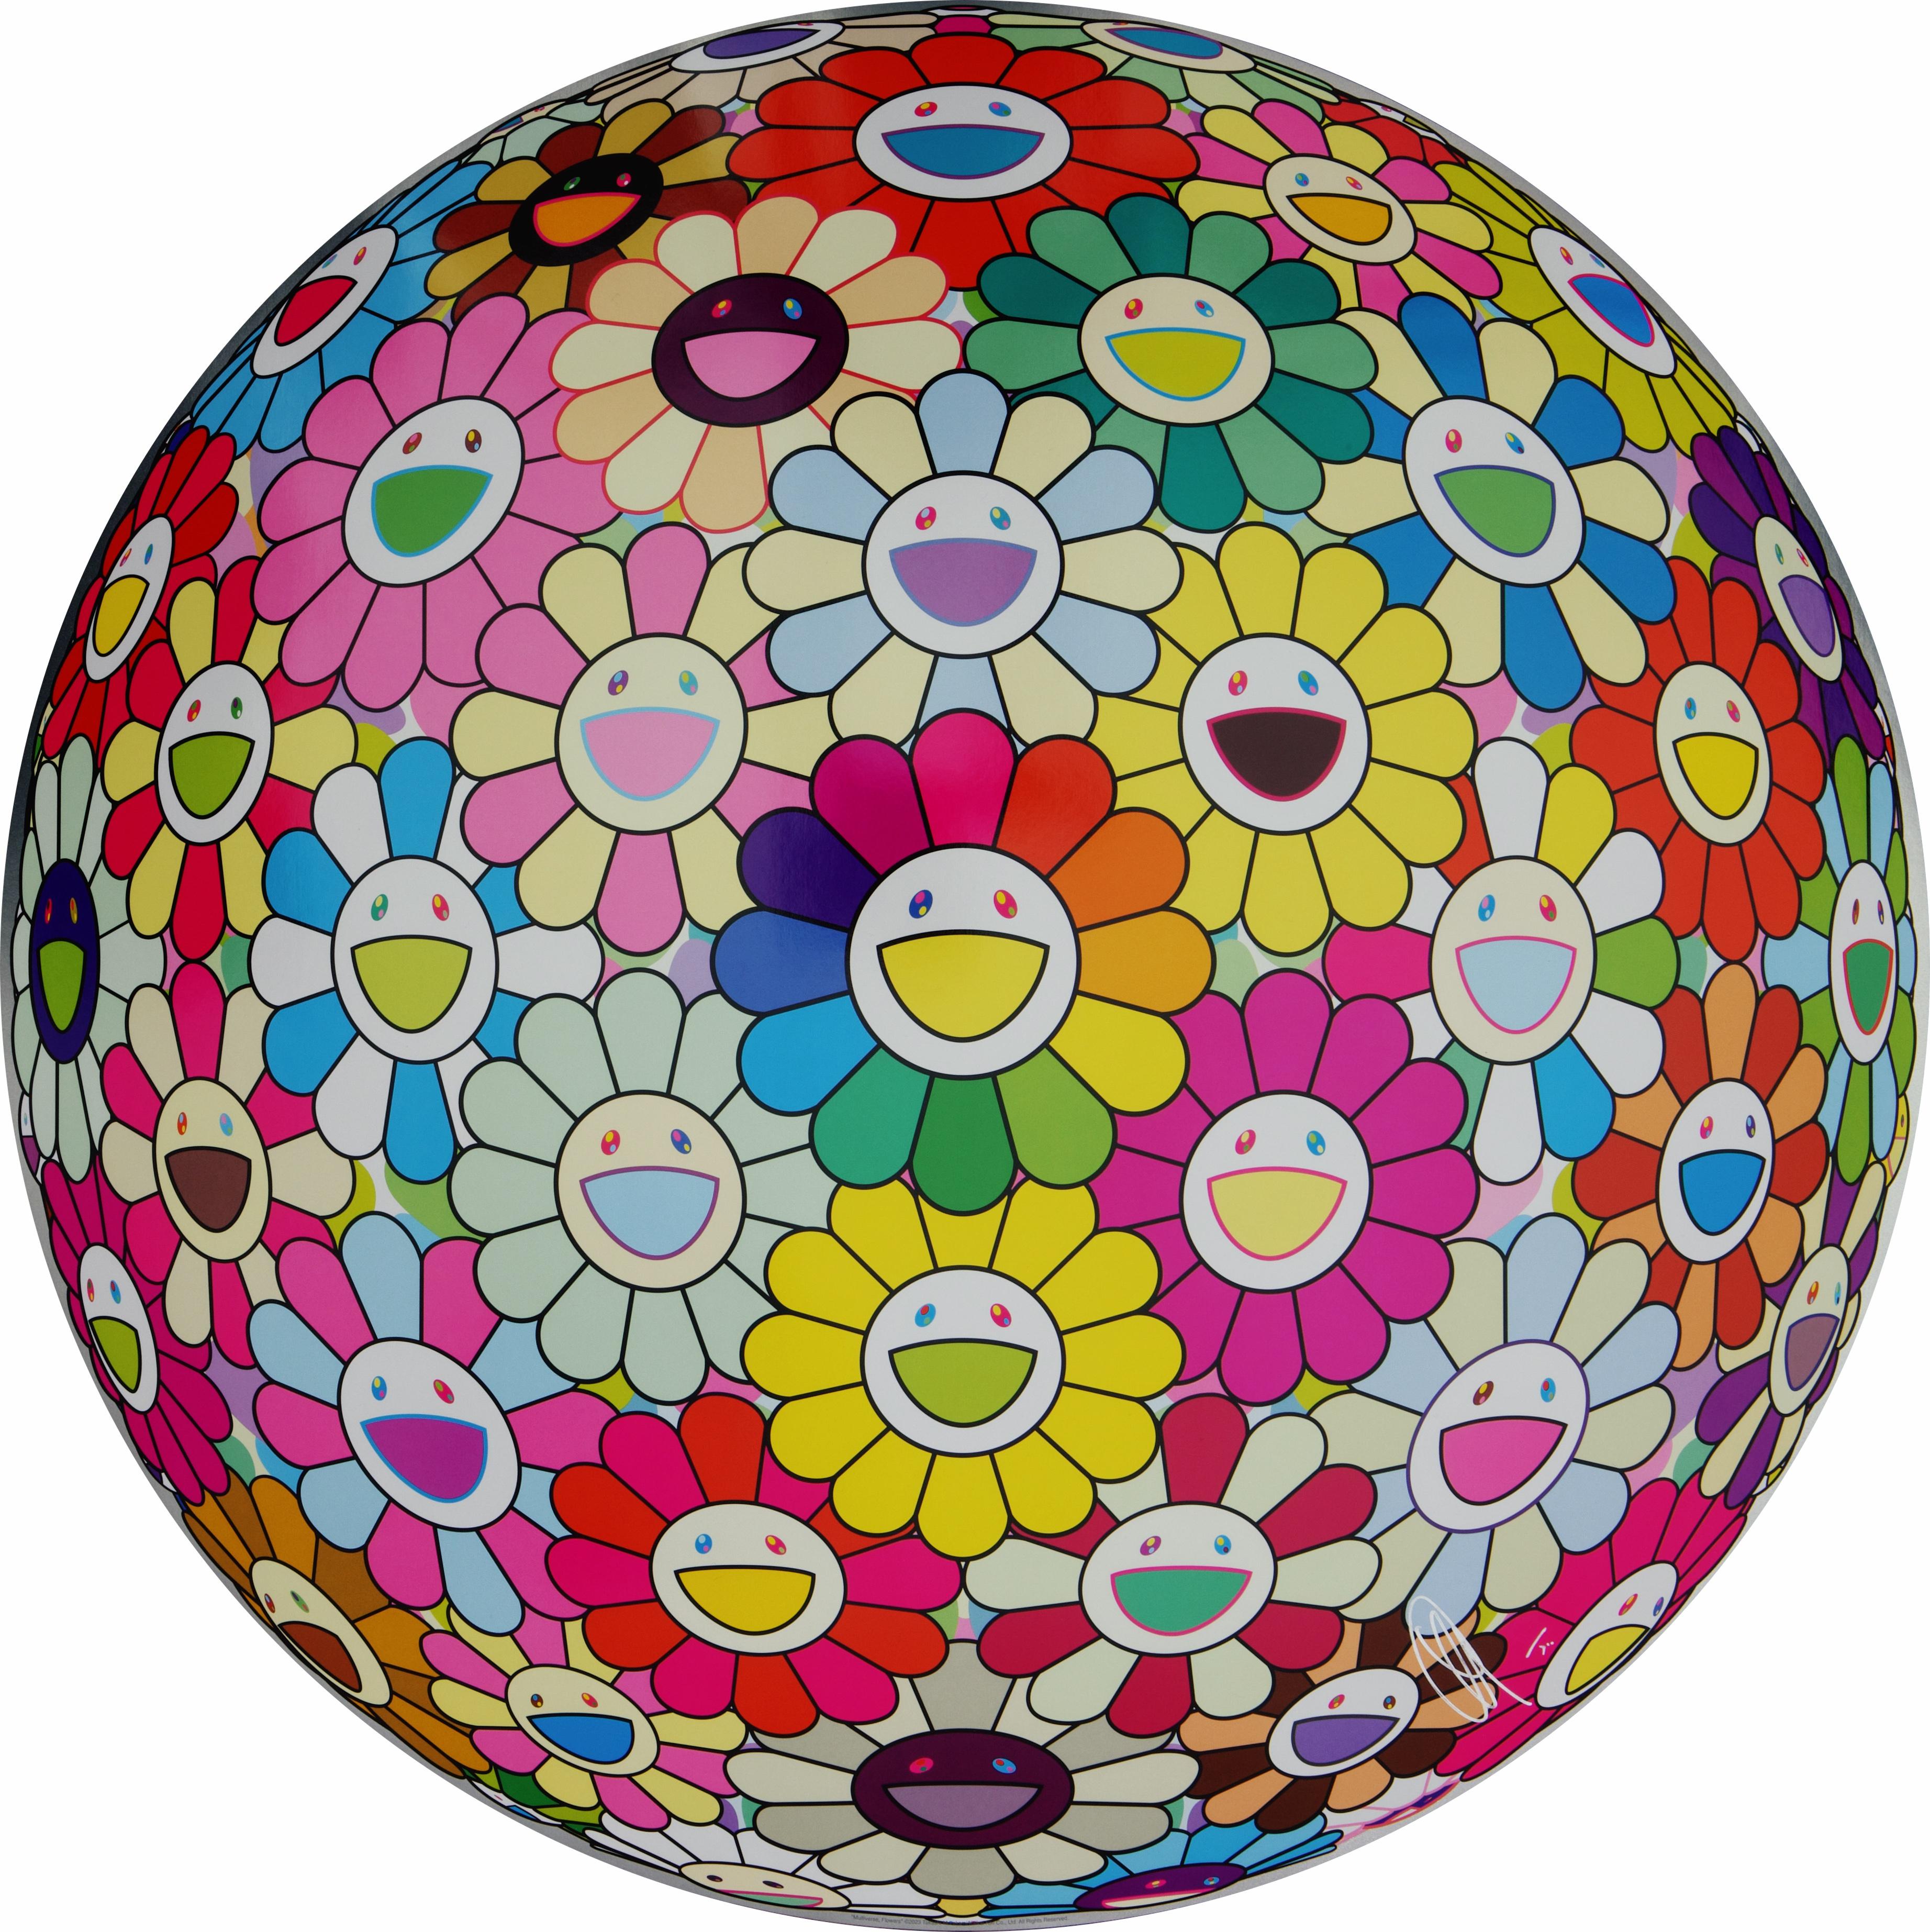 Artist: Takashi Murakami
Title: Multiverse, Flowers
Year: 2023
Edition: 300
Size: 710mm / 27.45"
Medium: Offset print, cold stamp and high gloss varnishing
This is hand signed and numbered by Takashi Murakami.

Takashi Murakami's Flowerballs are